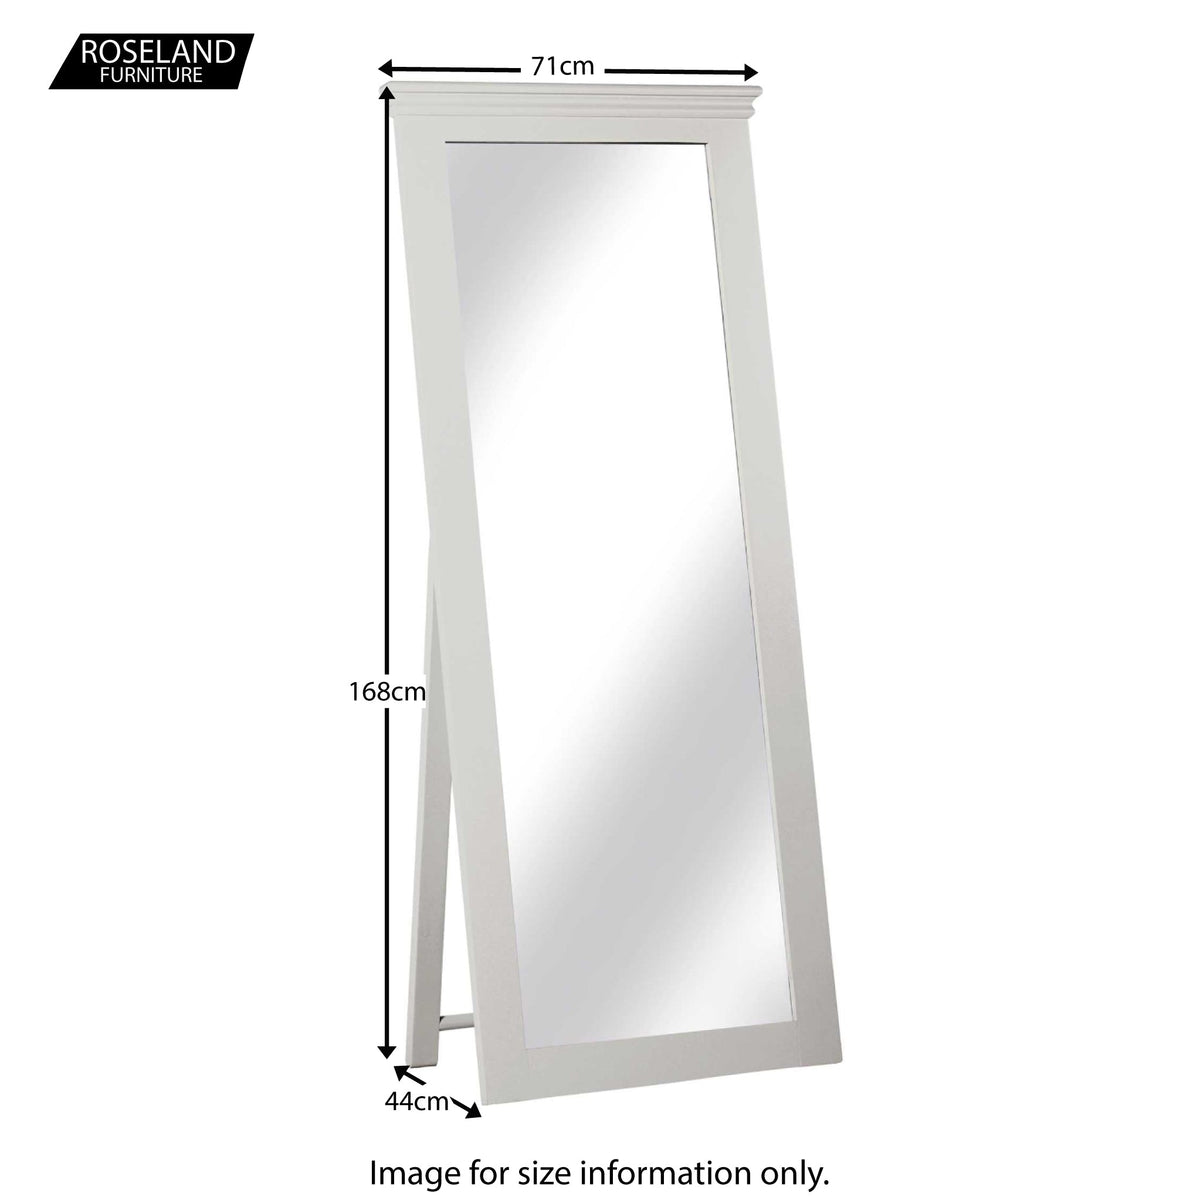 Dimensions for the Melrose White Tall Freestanding Cheval Mirror from Roseland Furniture